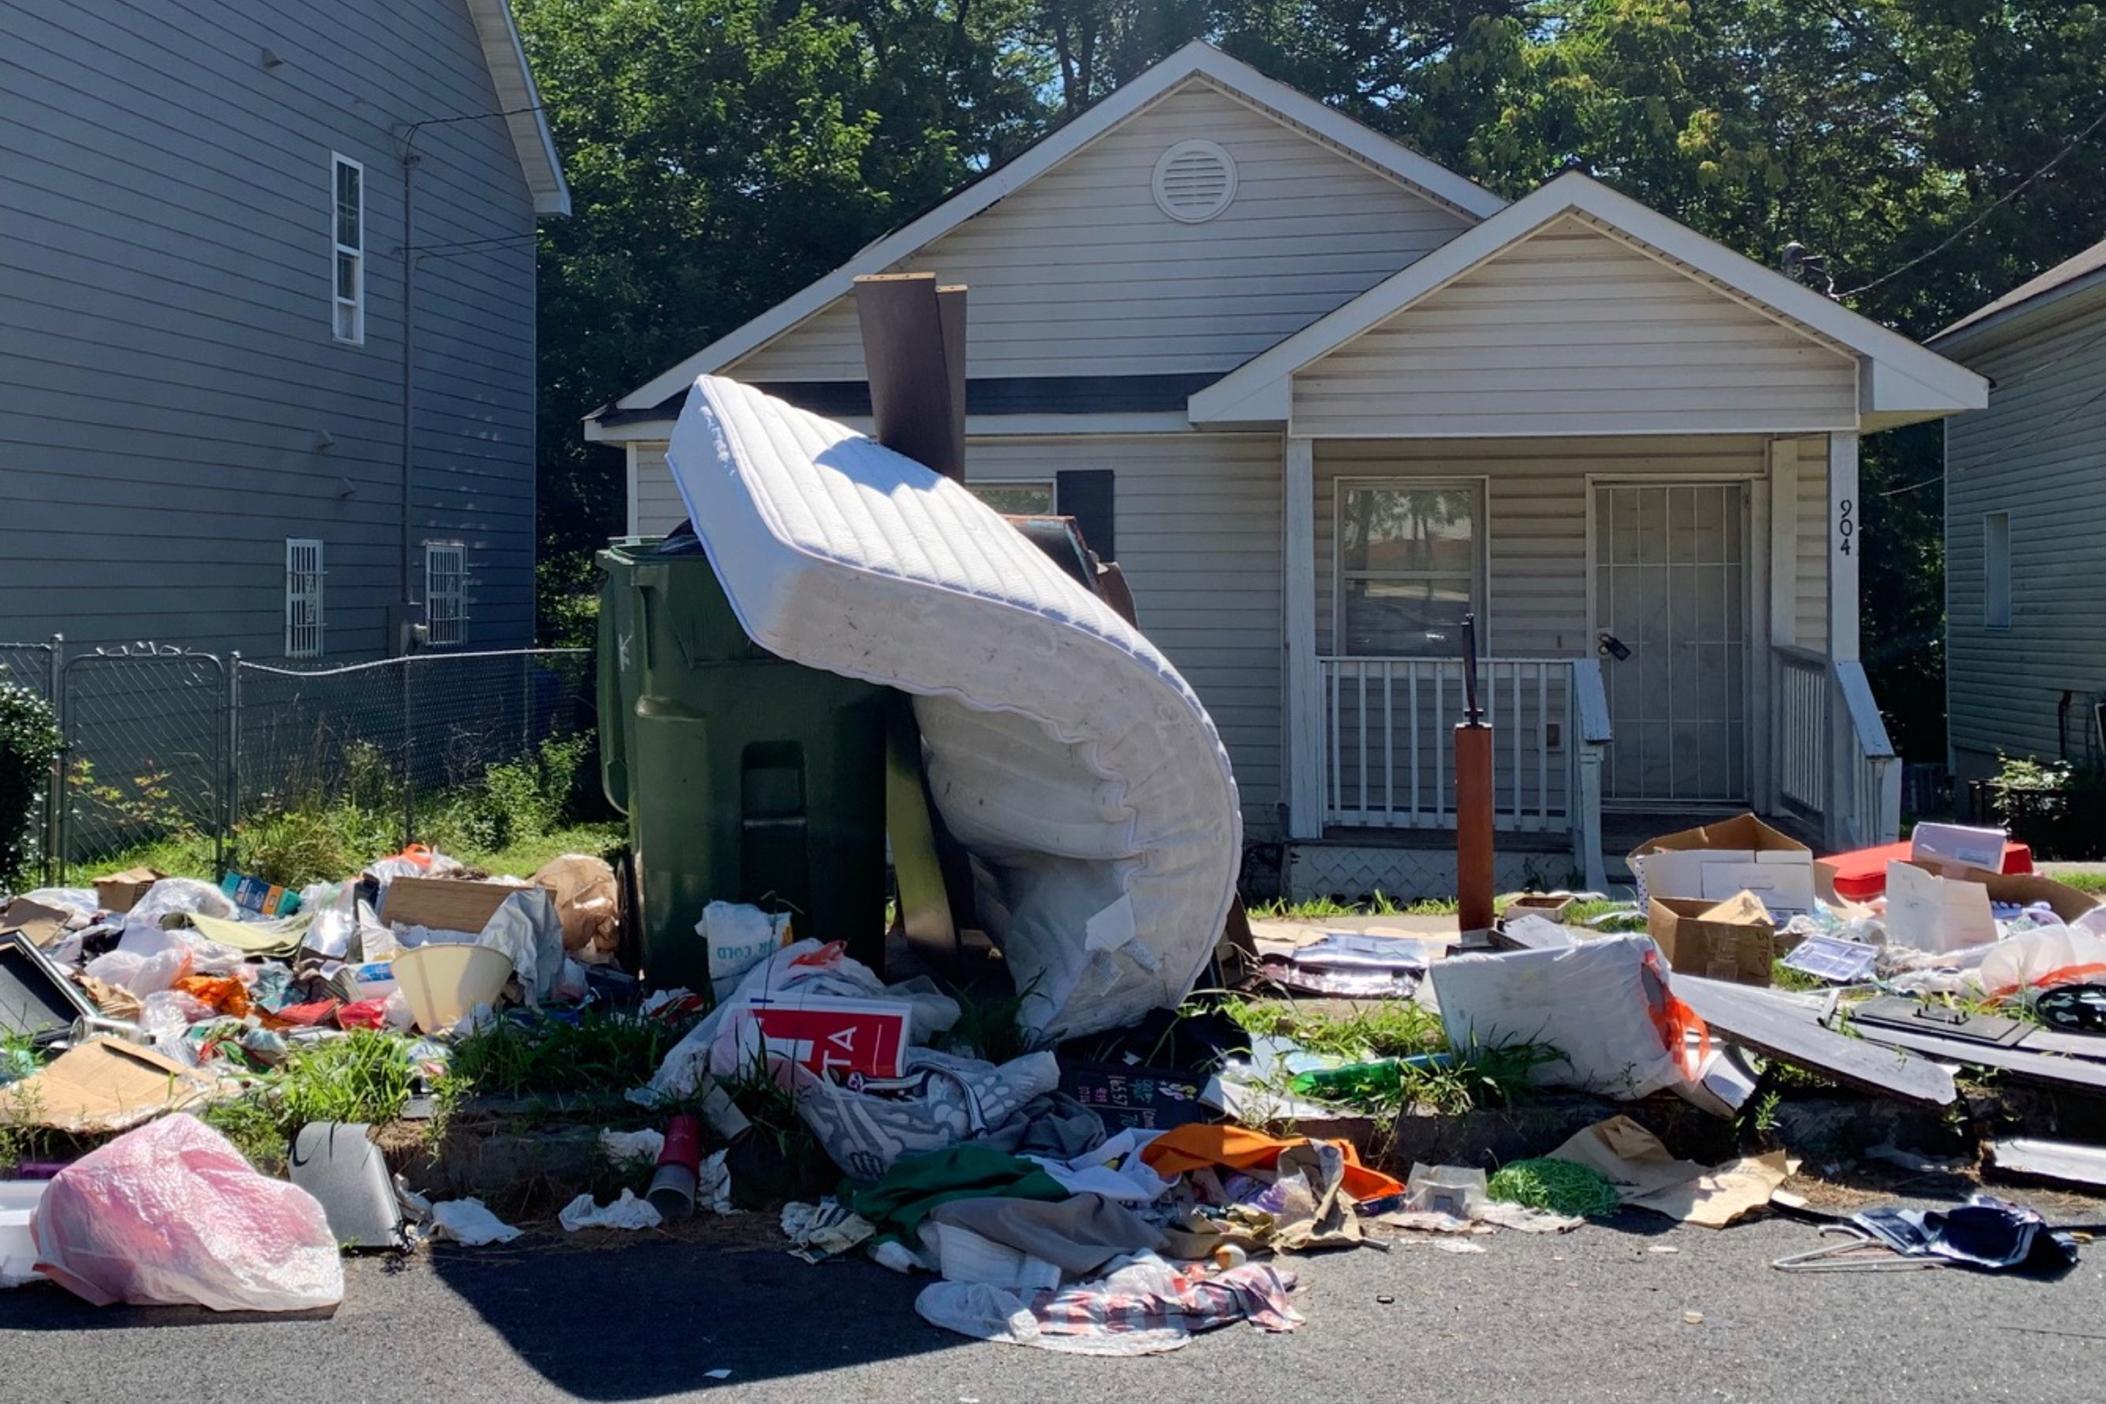 An Atlanta home from which people were removed is shown. A pandemic-mandated moratorium on evictions ended Aug. 1, 2021, but the Biden administration installed a two-month extension, though tens of thousands of households in metro Atlanta alone remain at risk of being homeless after it expires in October. 